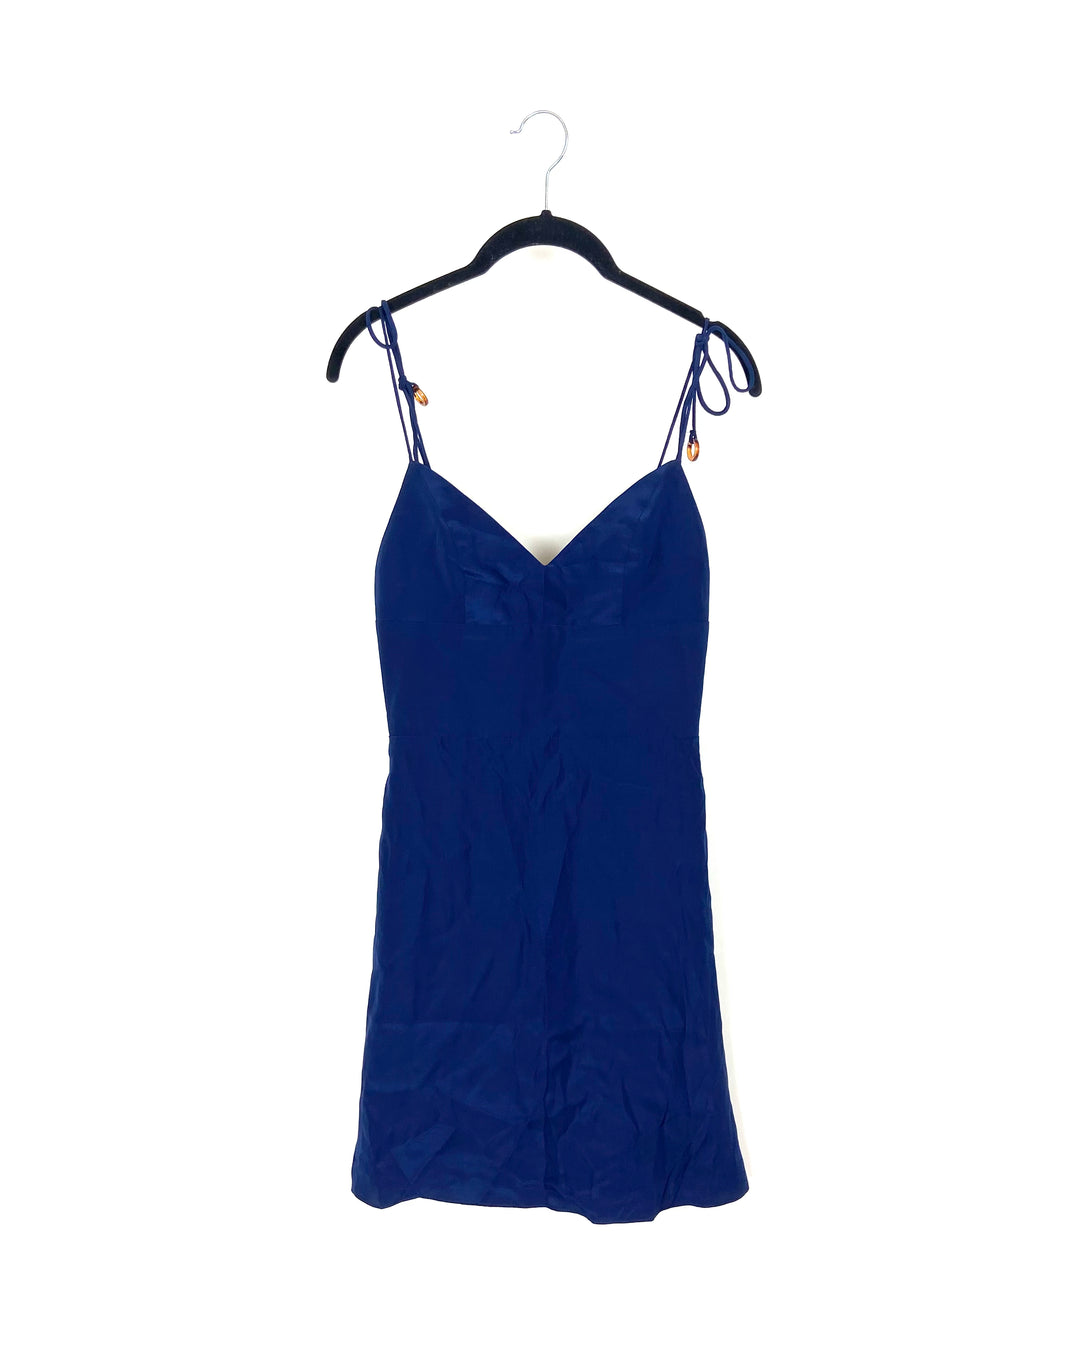 Navy Blue Dress With Ring Straps - Size 2-4